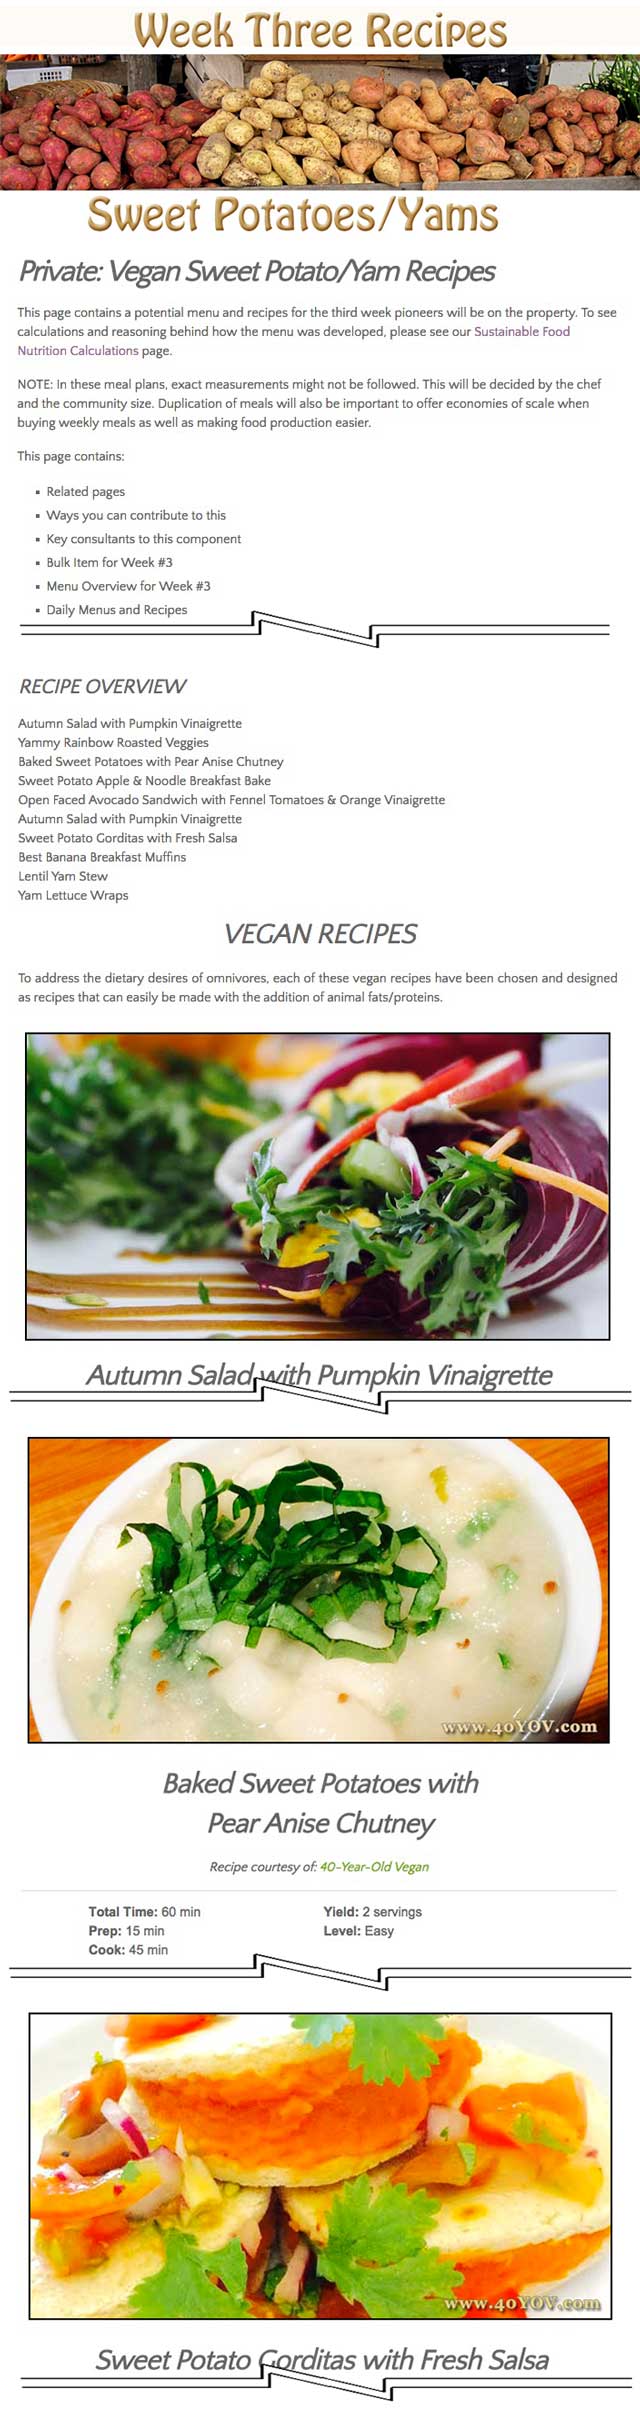 As part of the development of our Food Self-sufficiency Transition Plan, which features contributions from Naturopathic Doctor Matt Marturano (creator of the COHERENT model for comprehensive digestive health), this week the core team compiled the sweet potato recipes, as you can see here. 